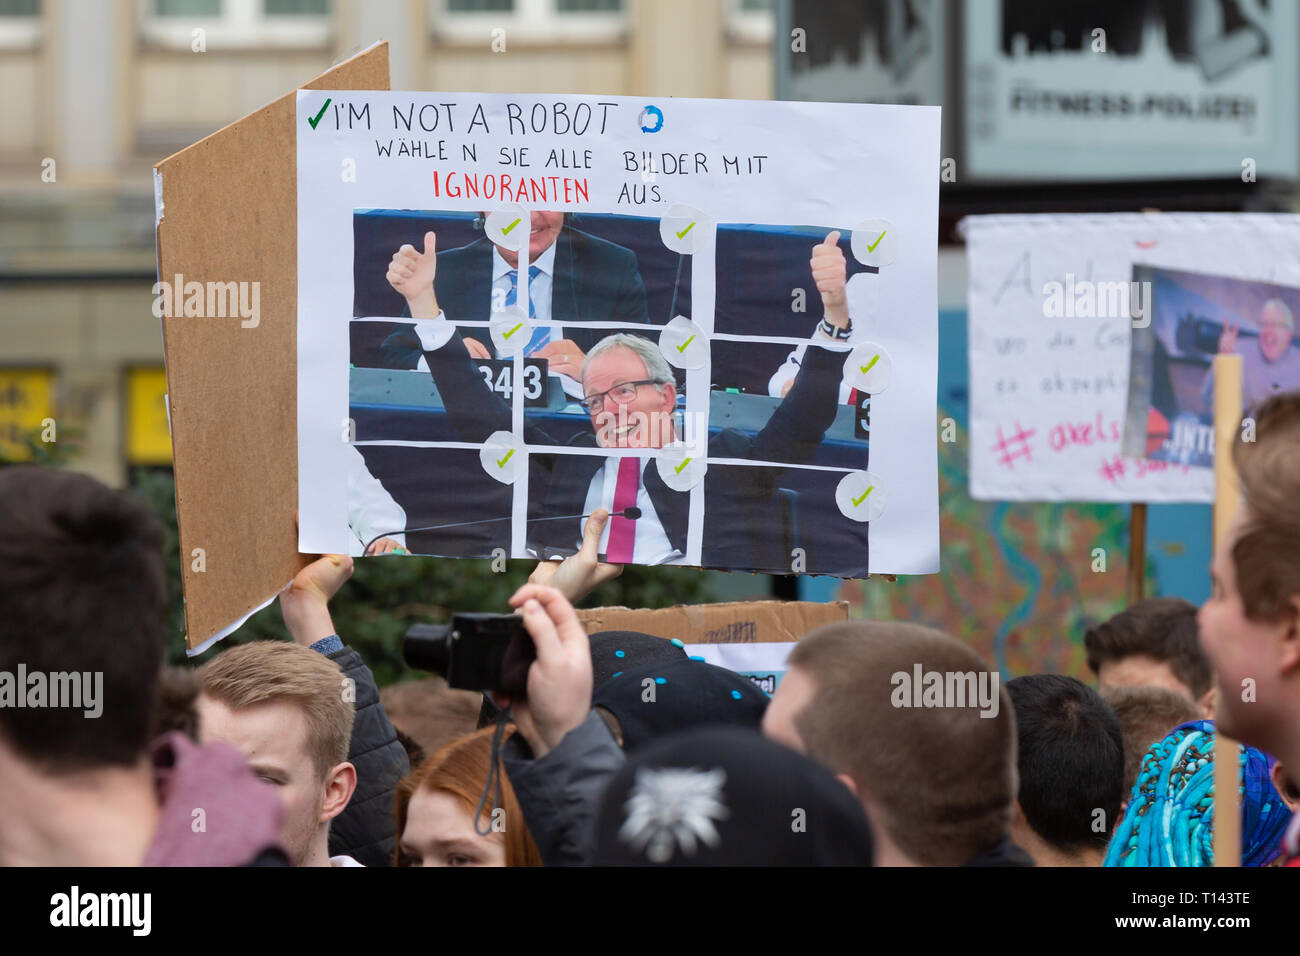 Cologne, Germany, March 23 2019: Billboards are displayed during a demonstration against upload filter.             Credit: Juergen Schwarz/Alamy Live News Stock Photo